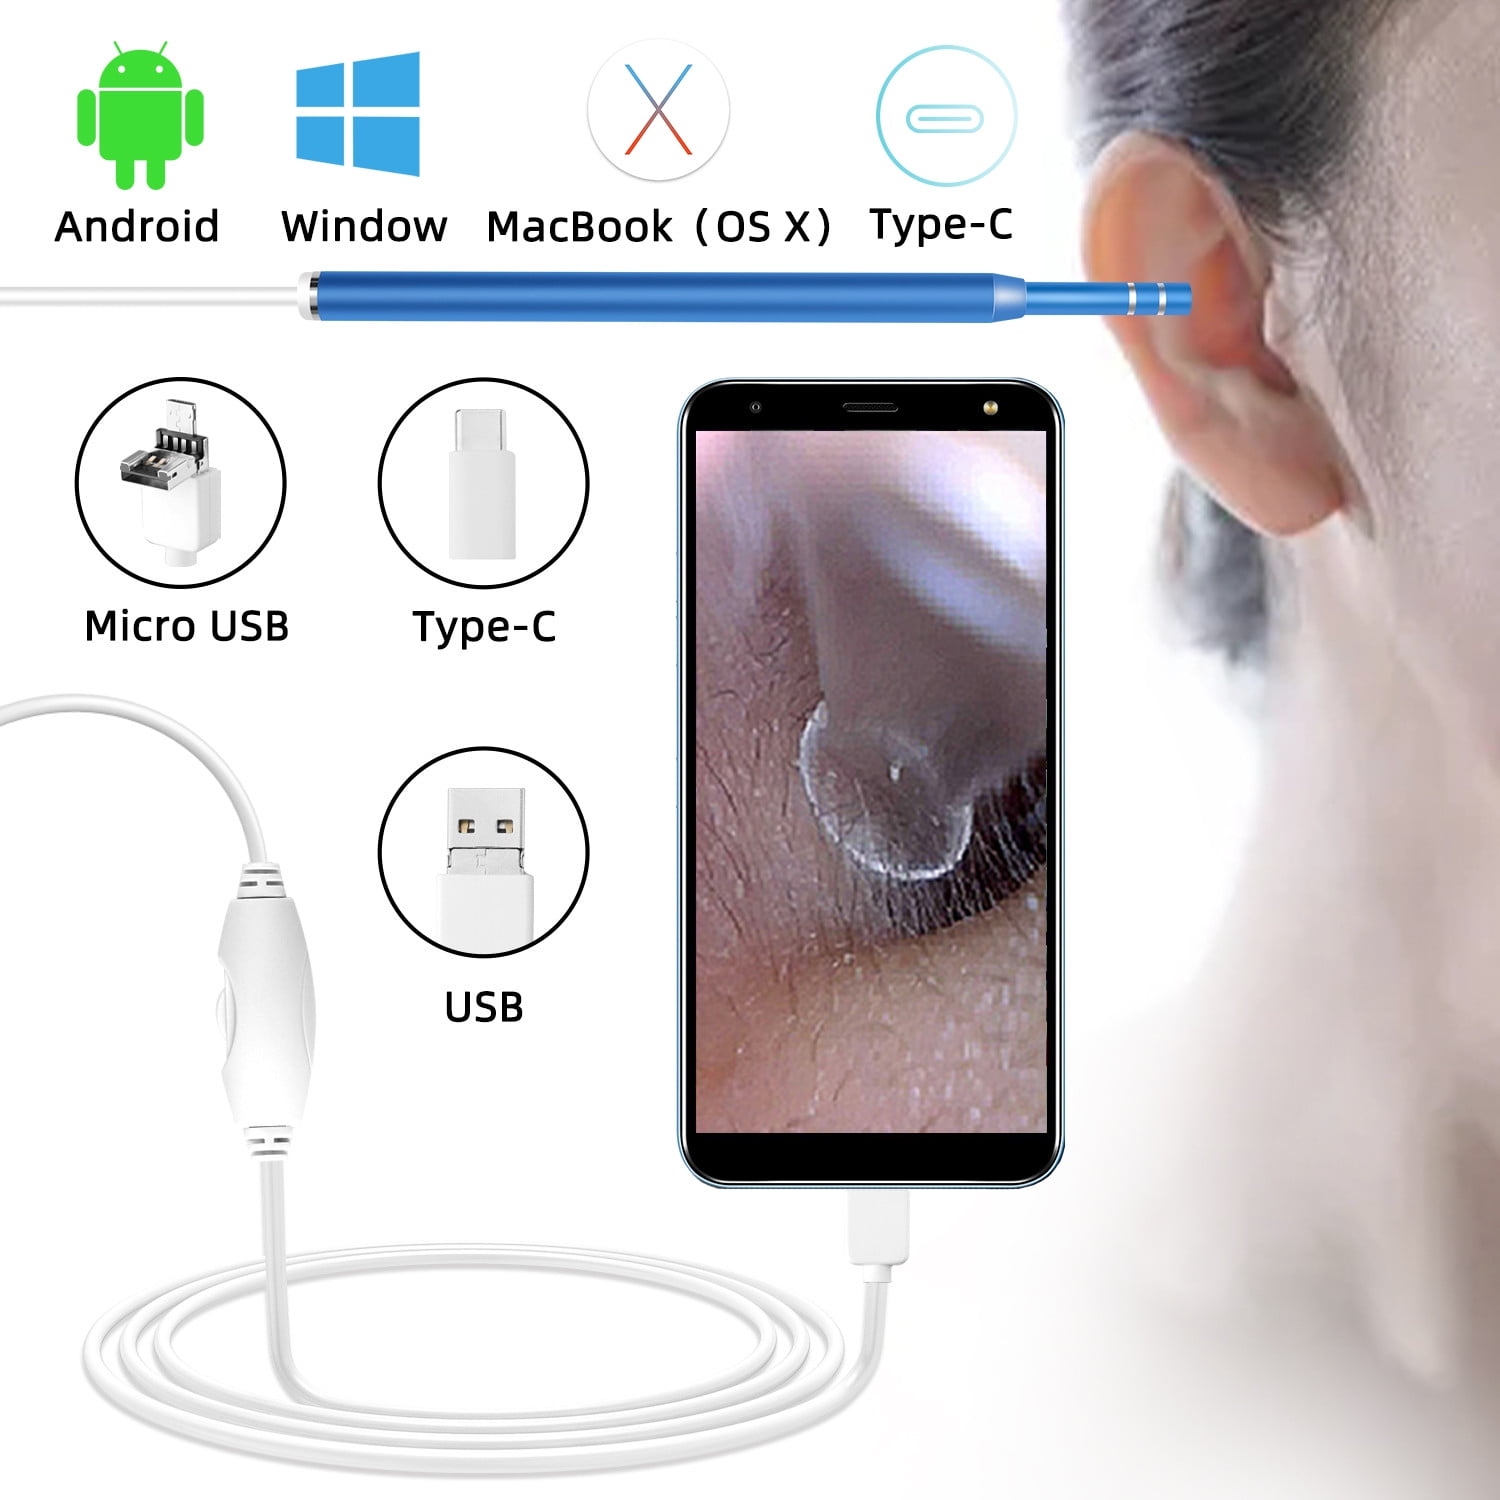 Compatible with Android iOS Smartphone and Tablet LOFTer Upgraded 3.9mm 1080P FHD Ear Camera Set Super Light Ear Wax Remover Tool with Temperature Control Chip White Wireless Digital Otoscope